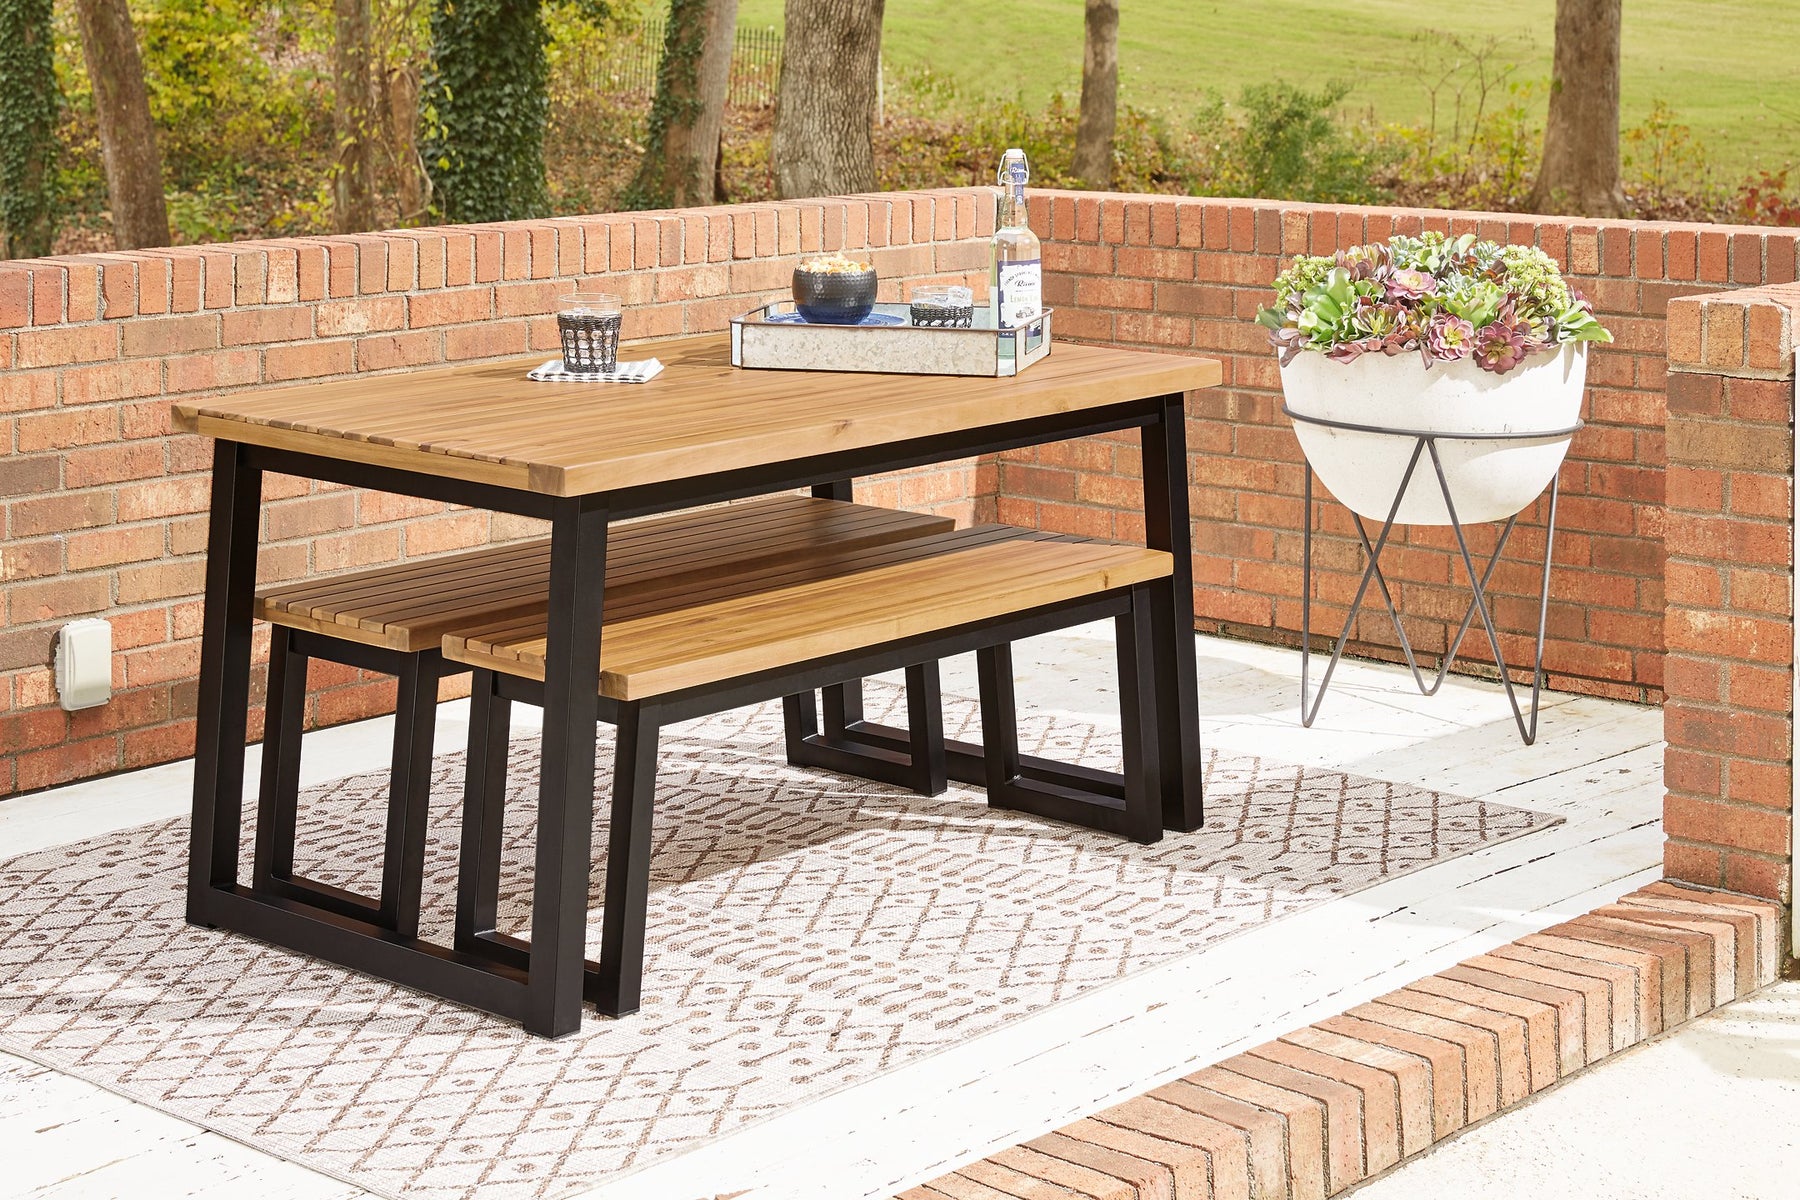 Town Wood Outdoor Dining Table Set (Set of 3) - Half Price Furniture